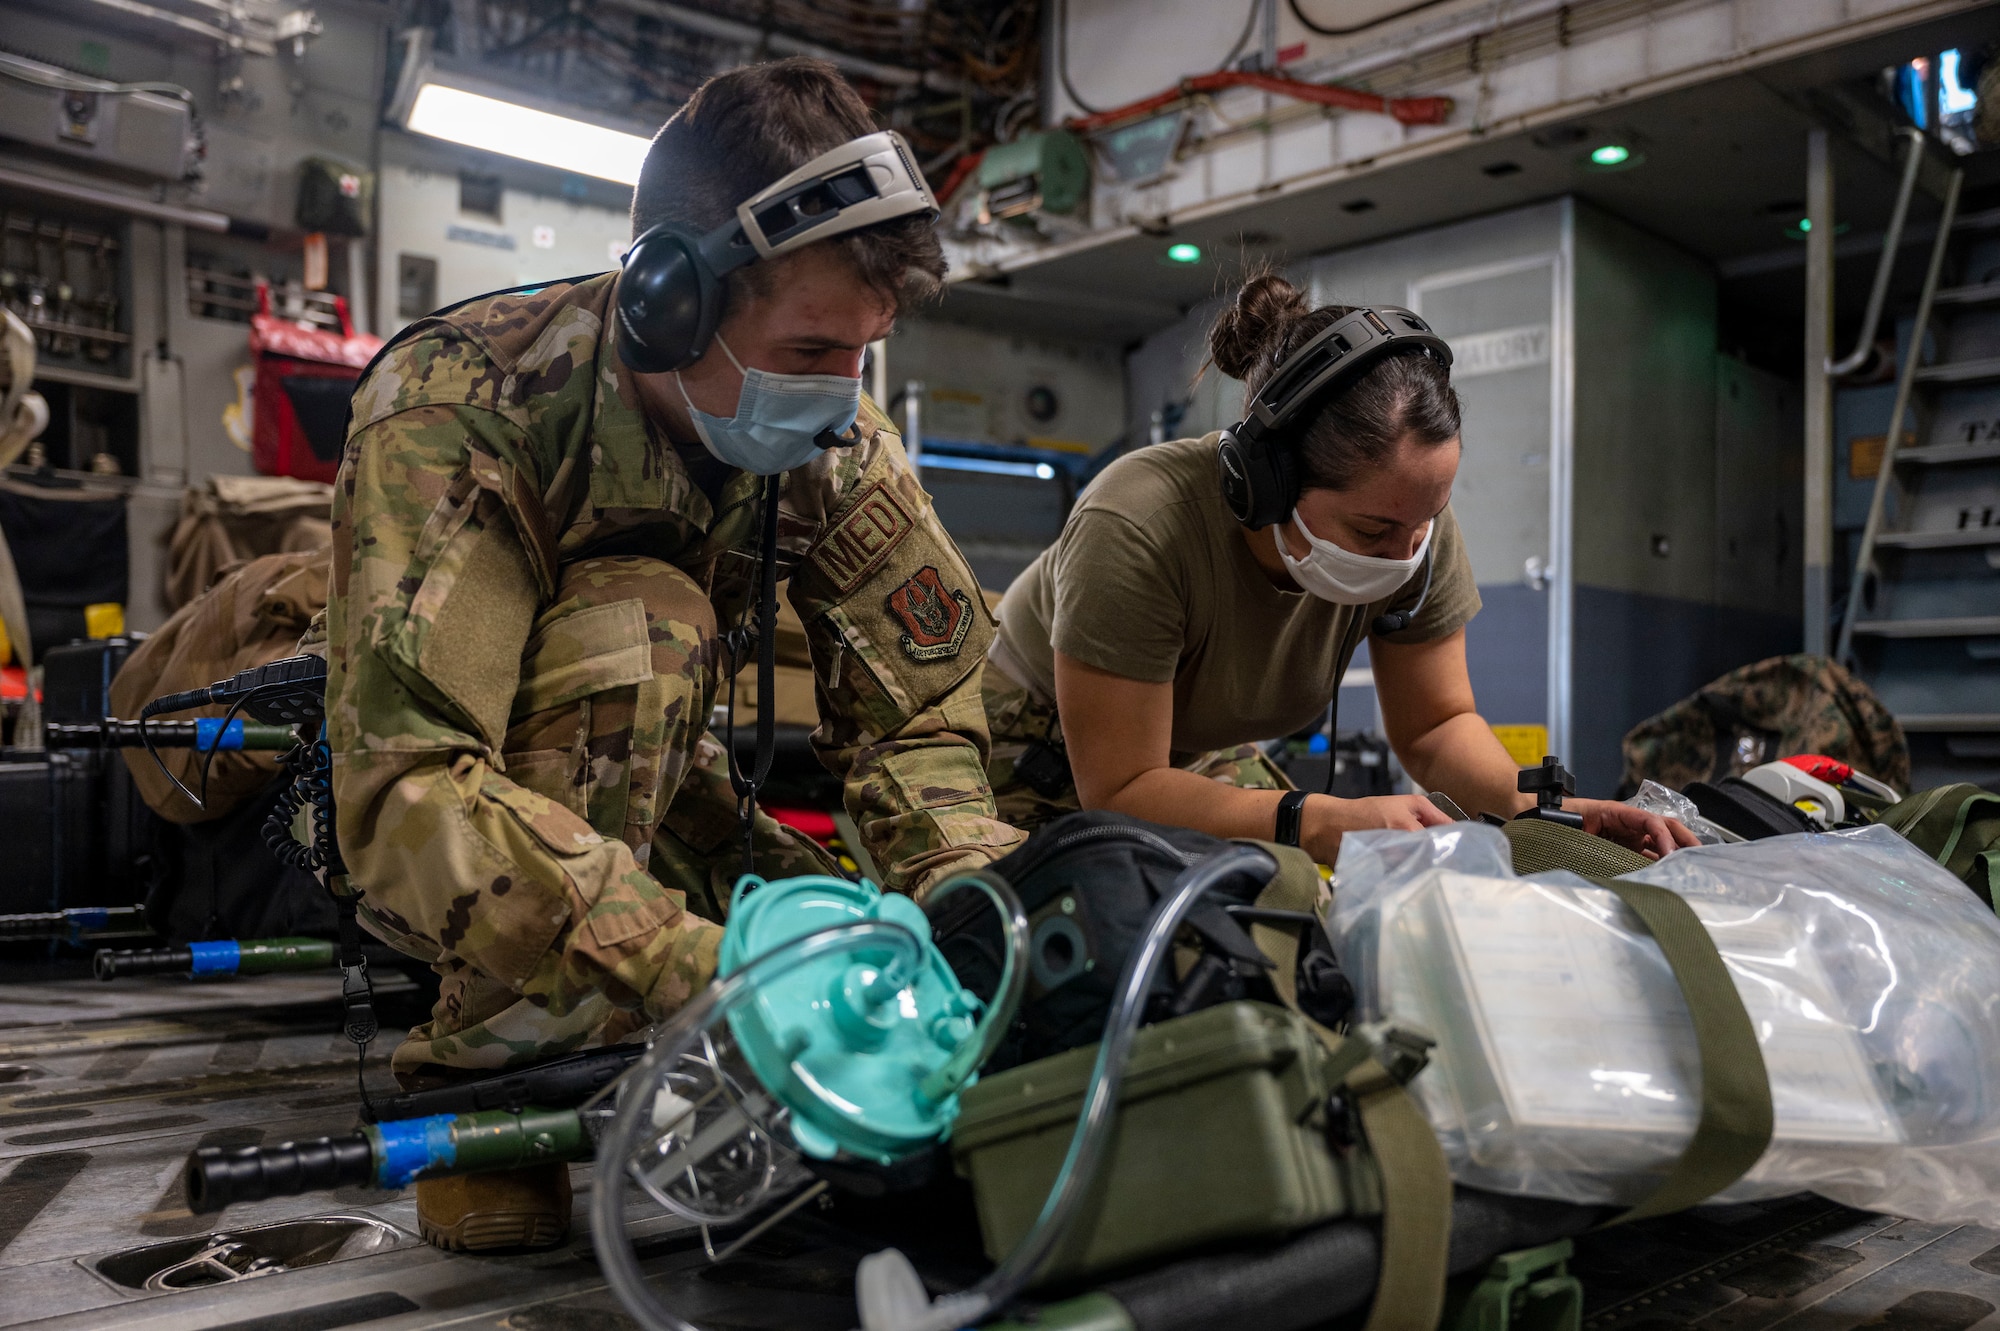 Technicians prepare a C-17 Globemaster III for simulated patients during an Aeromedical Evacuation exercise